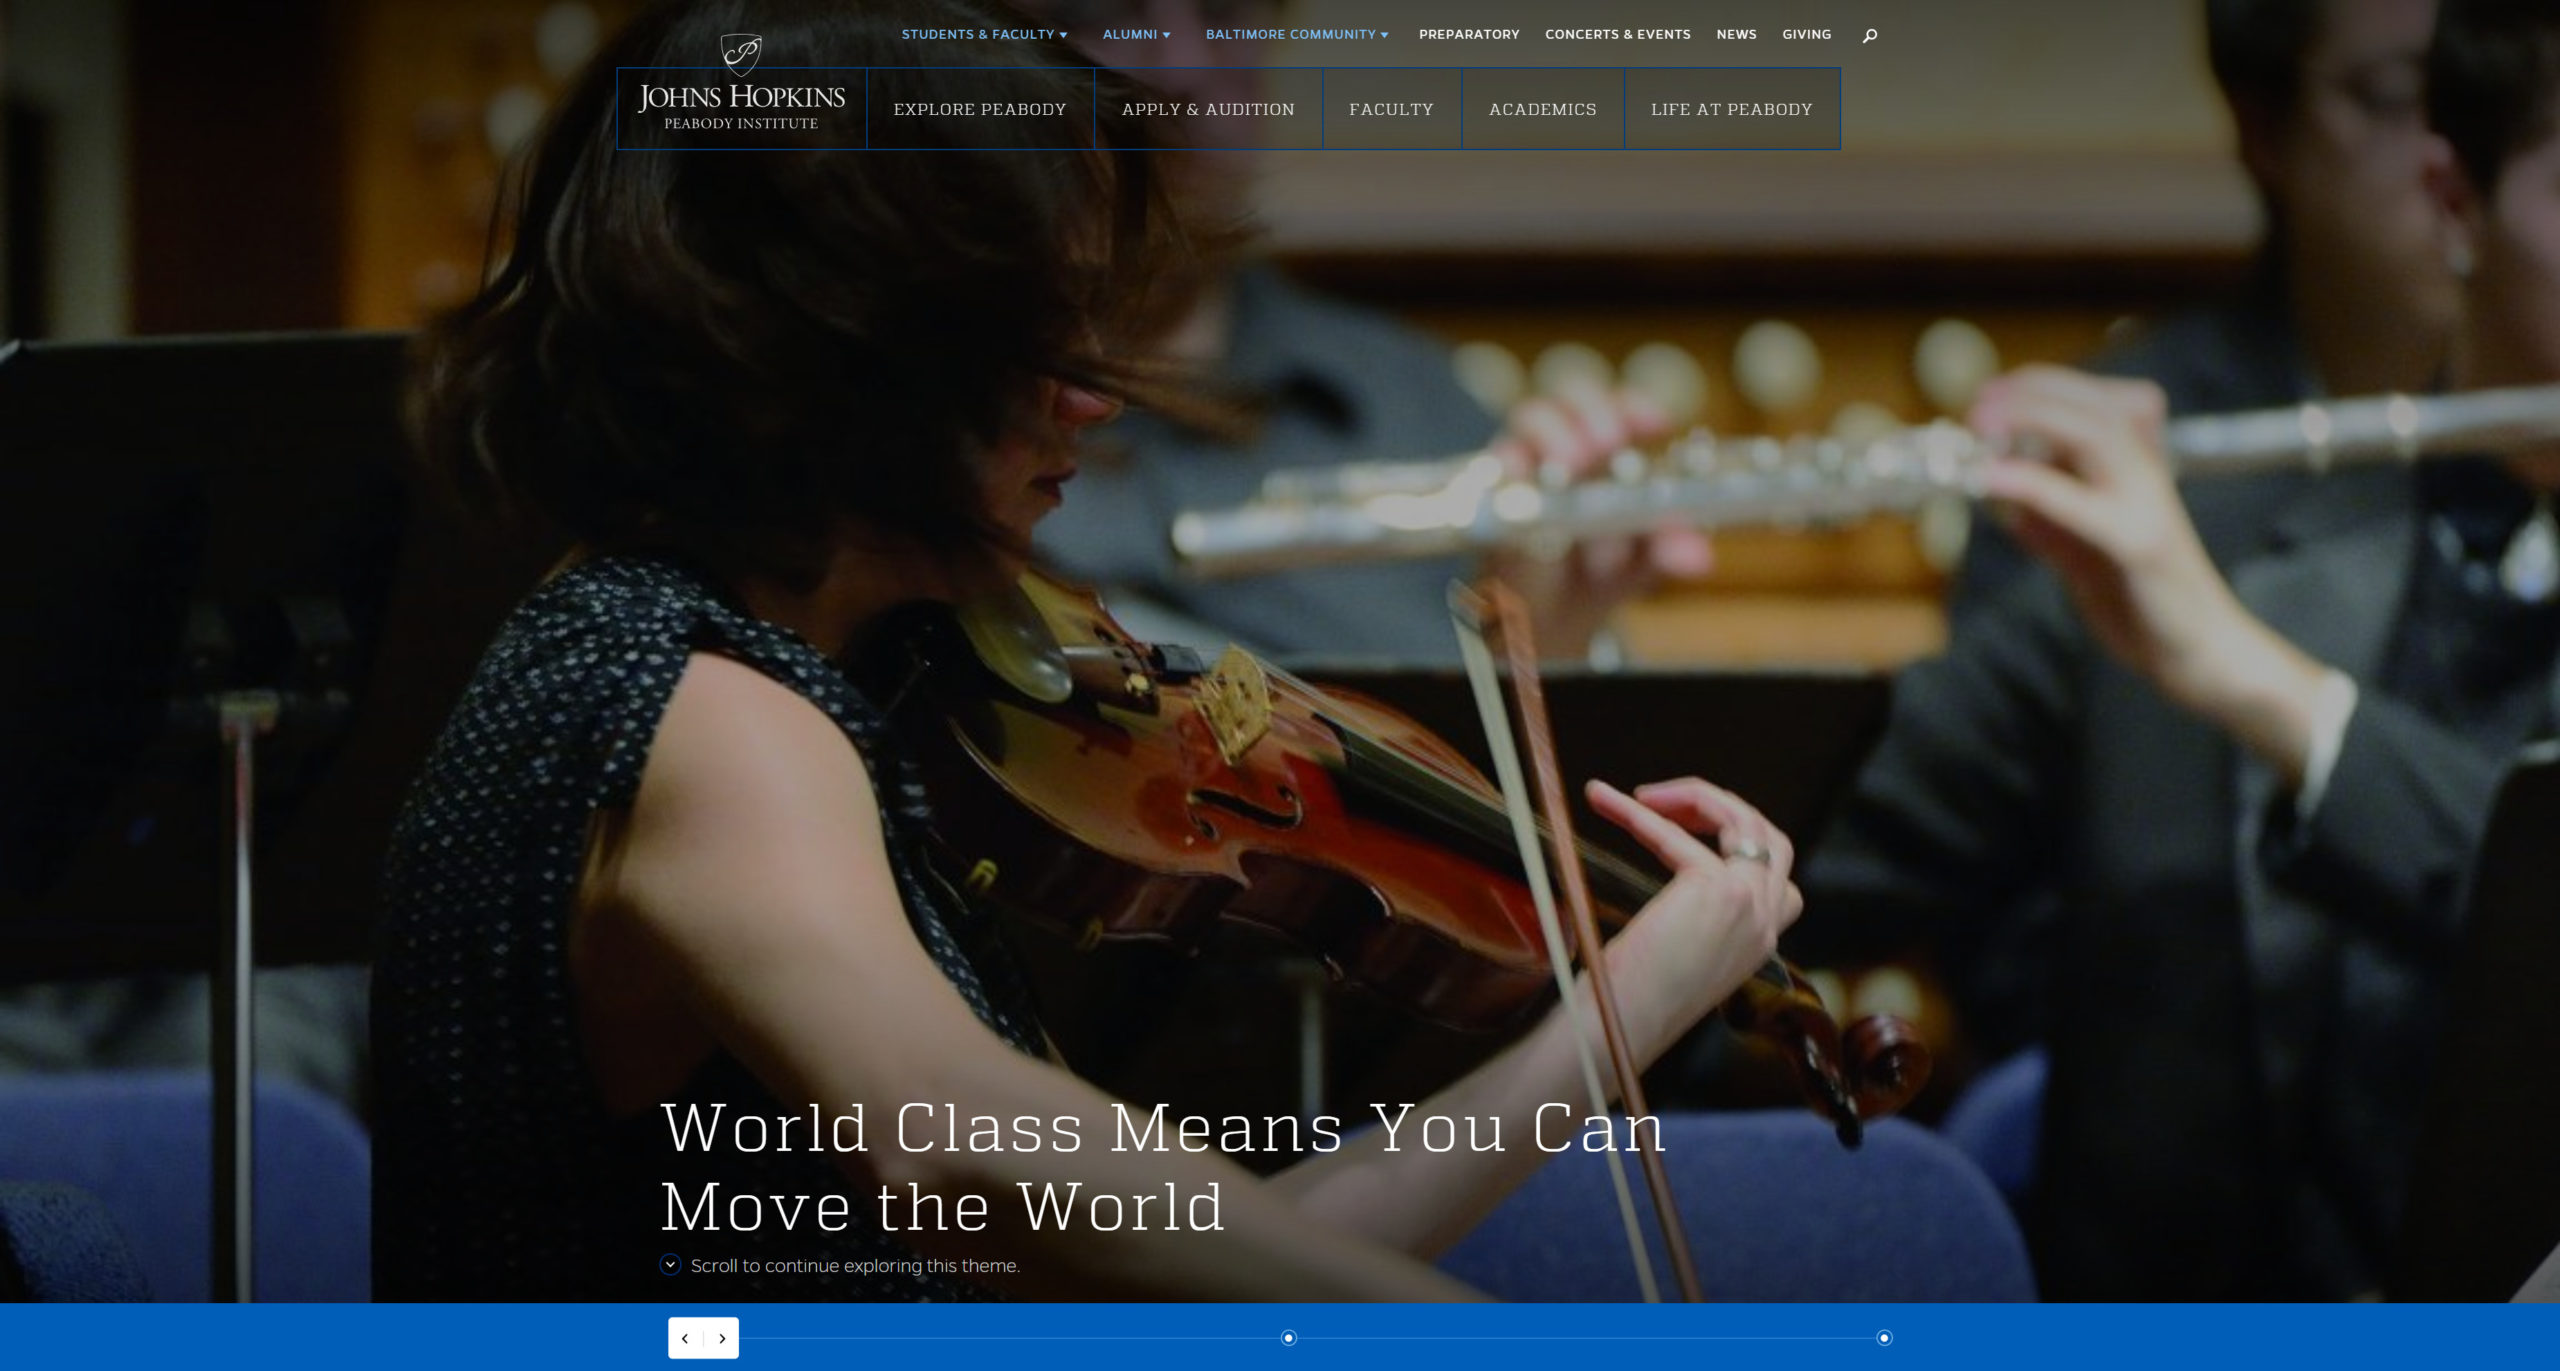 Go to Peabody Institute for John Hopkins website to see the design.